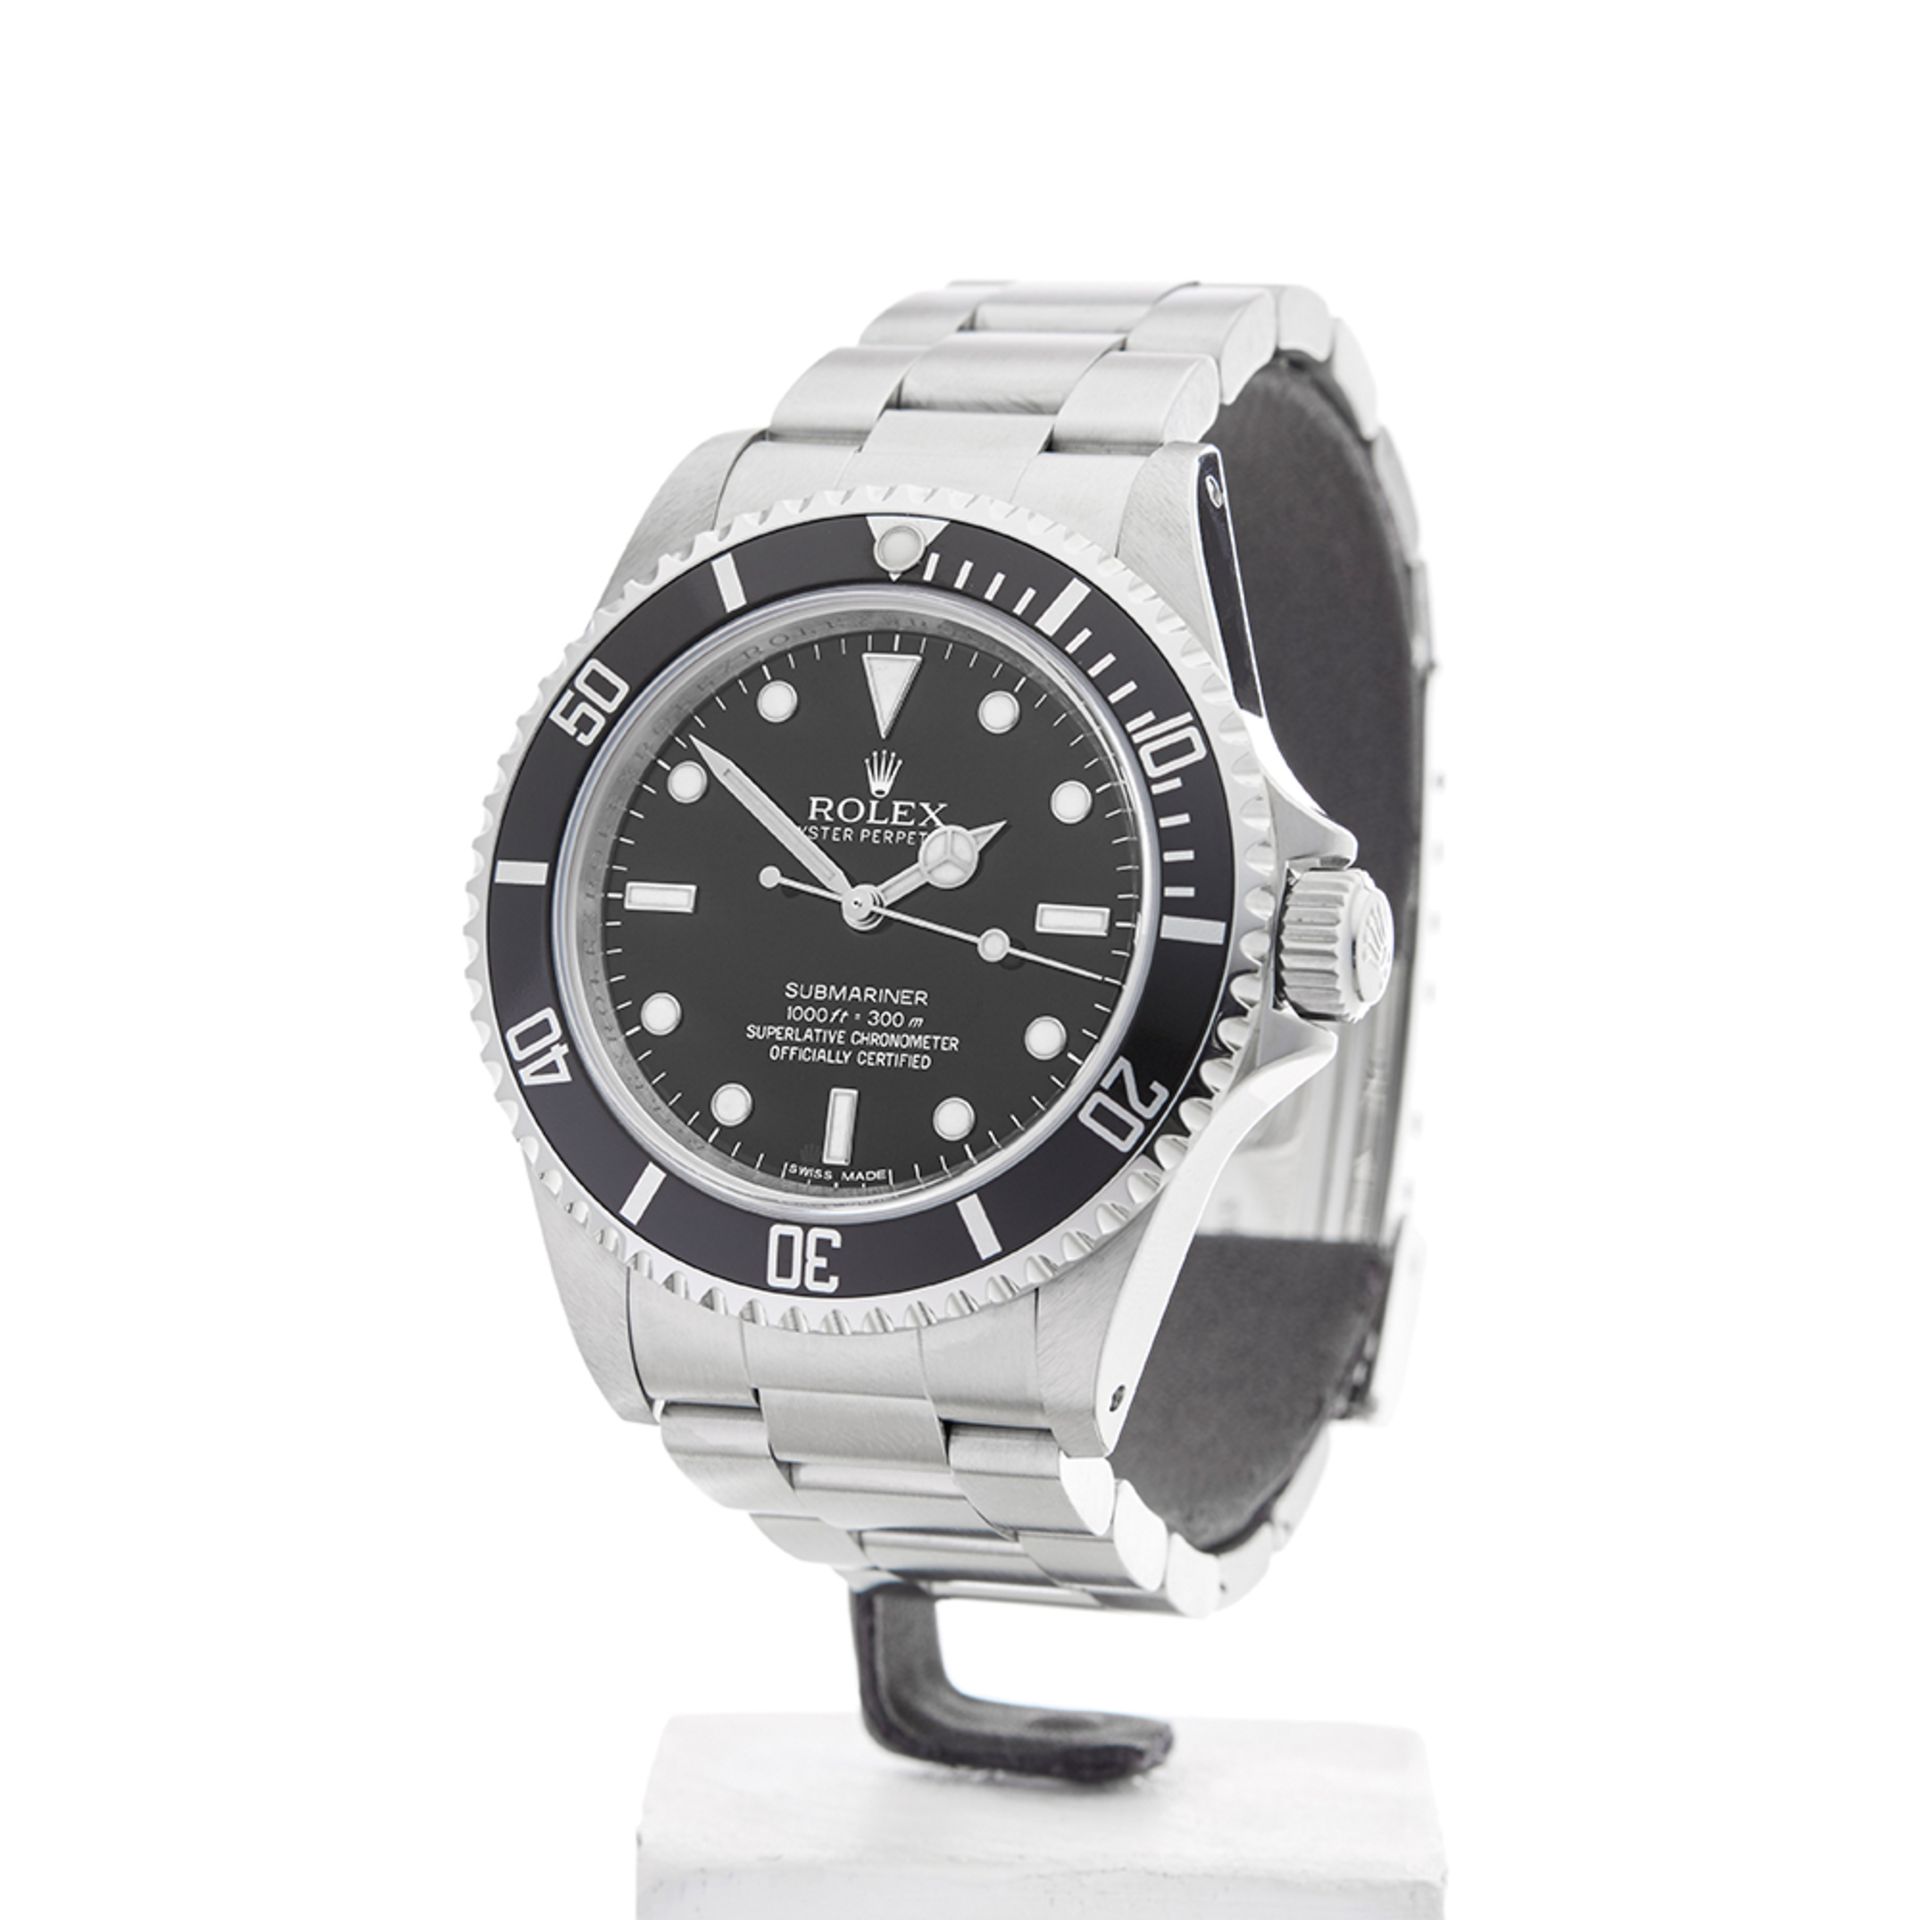 Rolex Submariner 40mm Stainless Steel - 14060M - Image 3 of 9